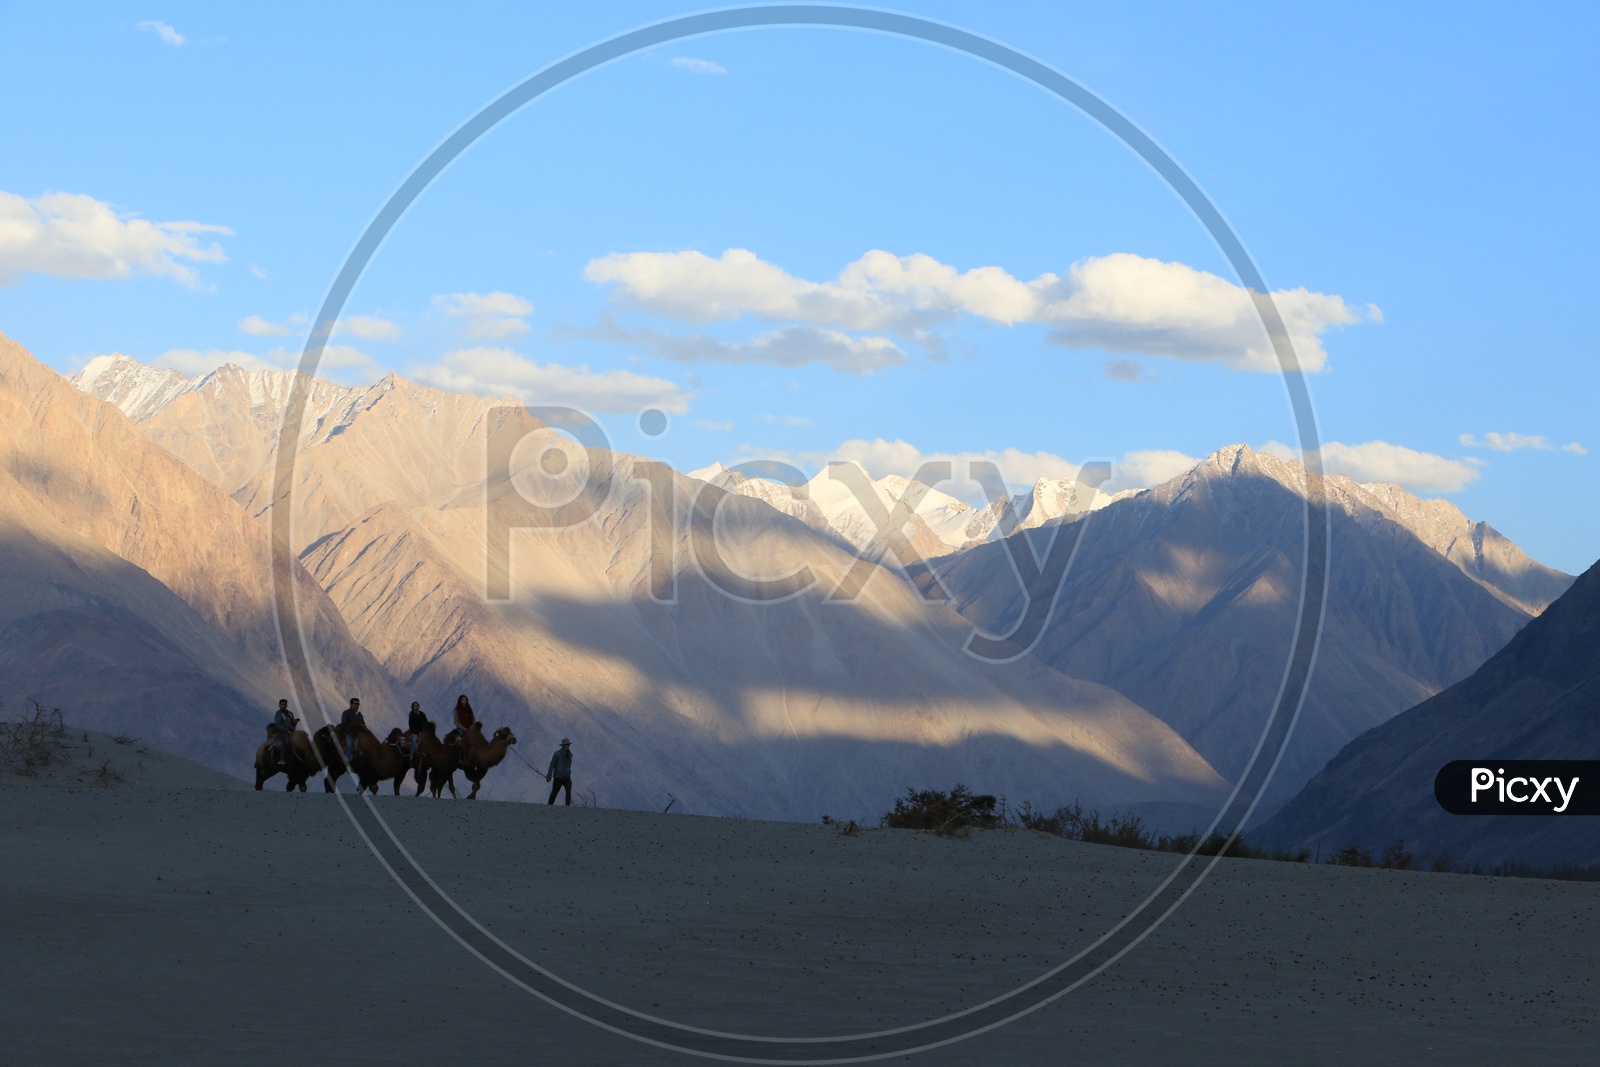 Travelers experiencing Camel Rides at Nubra Valley with beautiful mountains in the background